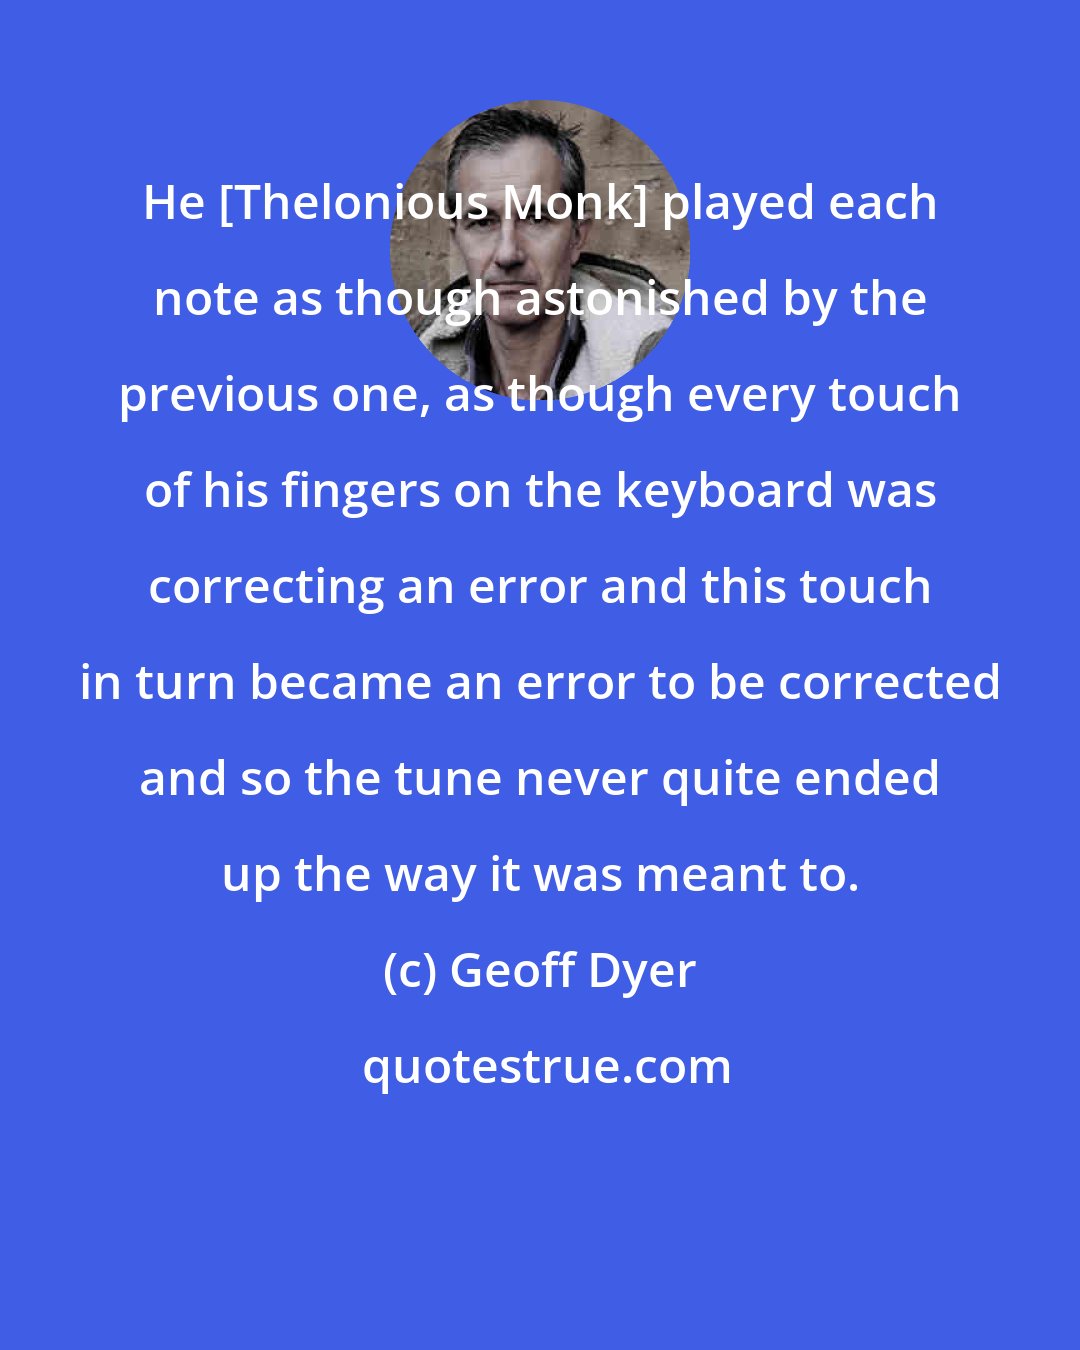 Geoff Dyer: He [Thelonious Monk] played each note as though astonished by the previous one, as though every touch of his fingers on the keyboard was correcting an error and this touch in turn became an error to be corrected and so the tune never quite ended up the way it was meant to.